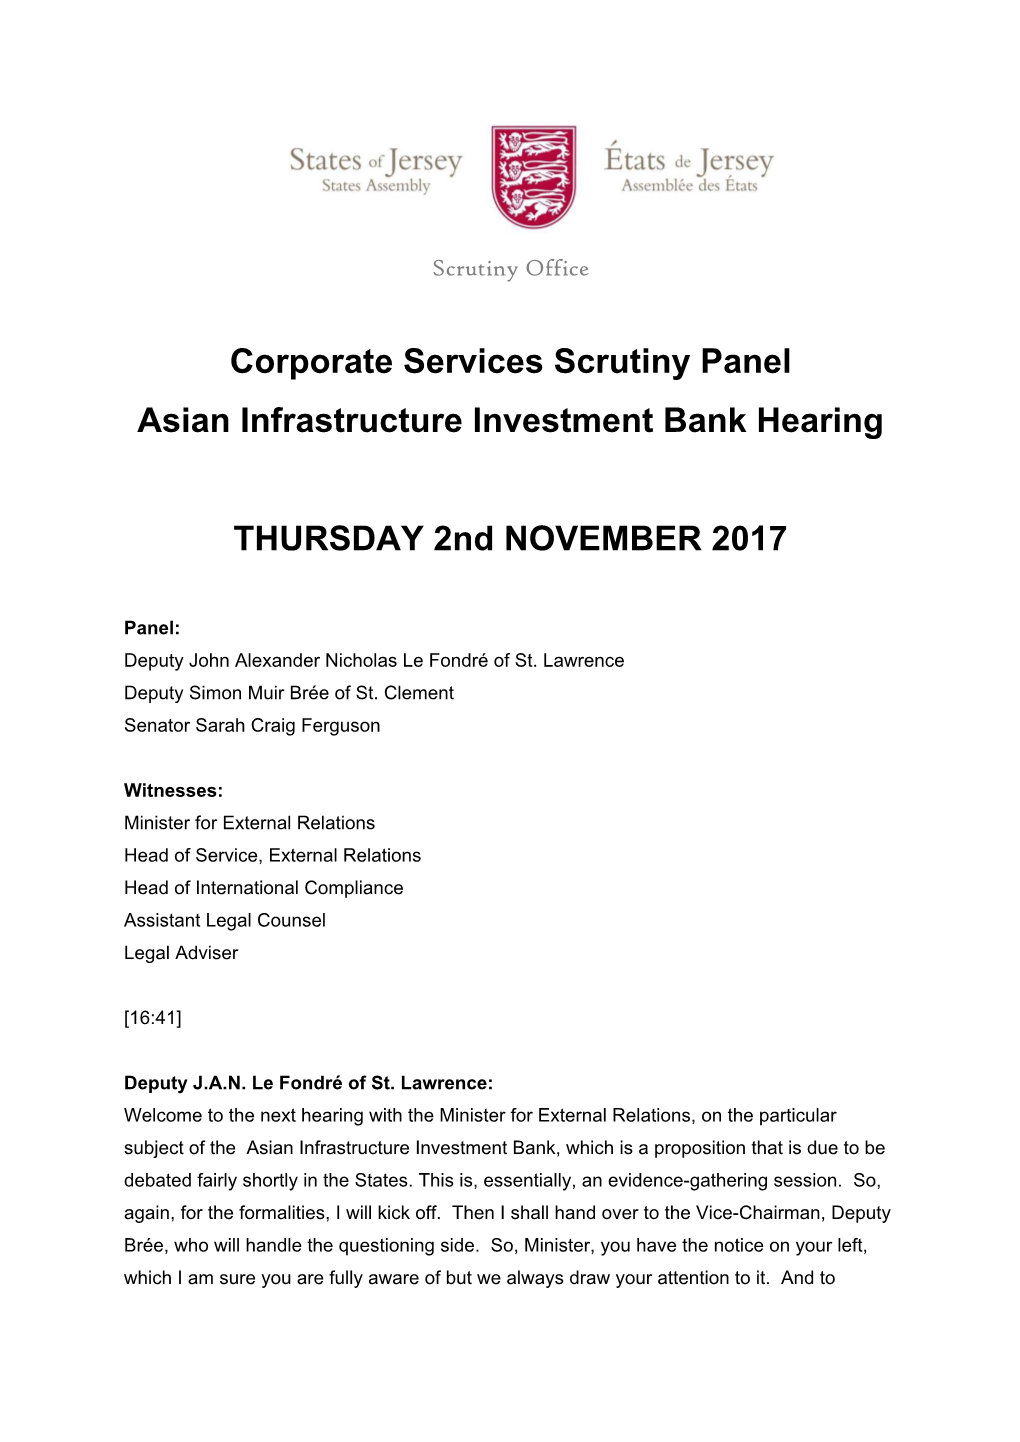 Corporate Services Scrutiny Panel Asian Infrastructure Investment Bank Hearing